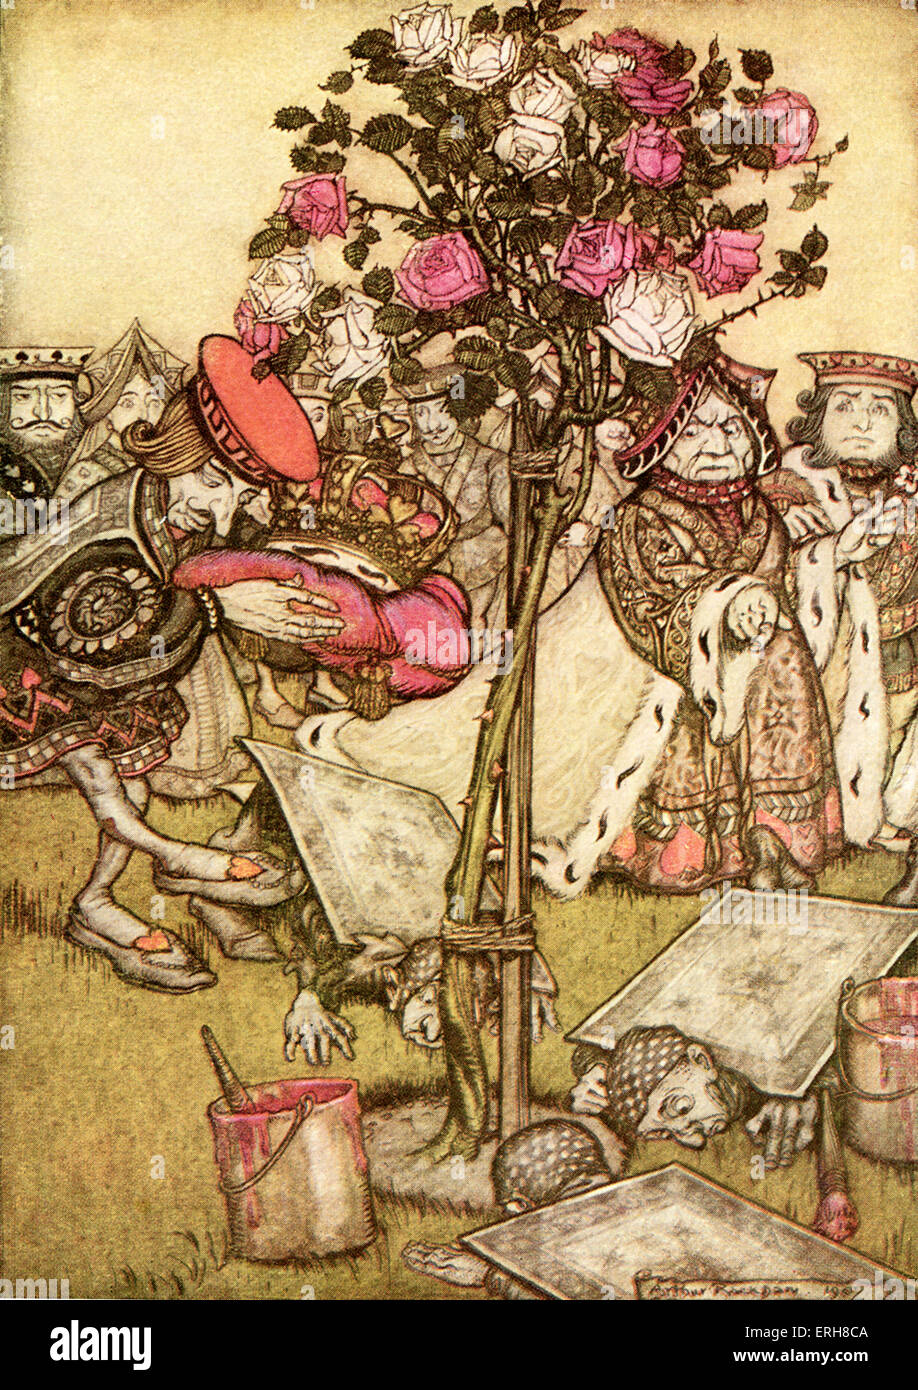 Alice 's Adventures in Wonderland by Lewis Carroll (Charles Lutwidge Dodgson). Caption reads:'The Garden of the Queen of Hearts. - The Queen turned angrily away from him and said to the nave, 'Turn them over'' (Chapter 8). Illustration by Arthur Rackham. (First published 1865). LC: English children's writer and mathematician 27 January 1832- 14 January 1898. AR: 1867 -1939 (Real name Reverend Charles Lutwidge Dodgson) English author: 27 January 1832 - 14 January 1898. Stock Photo